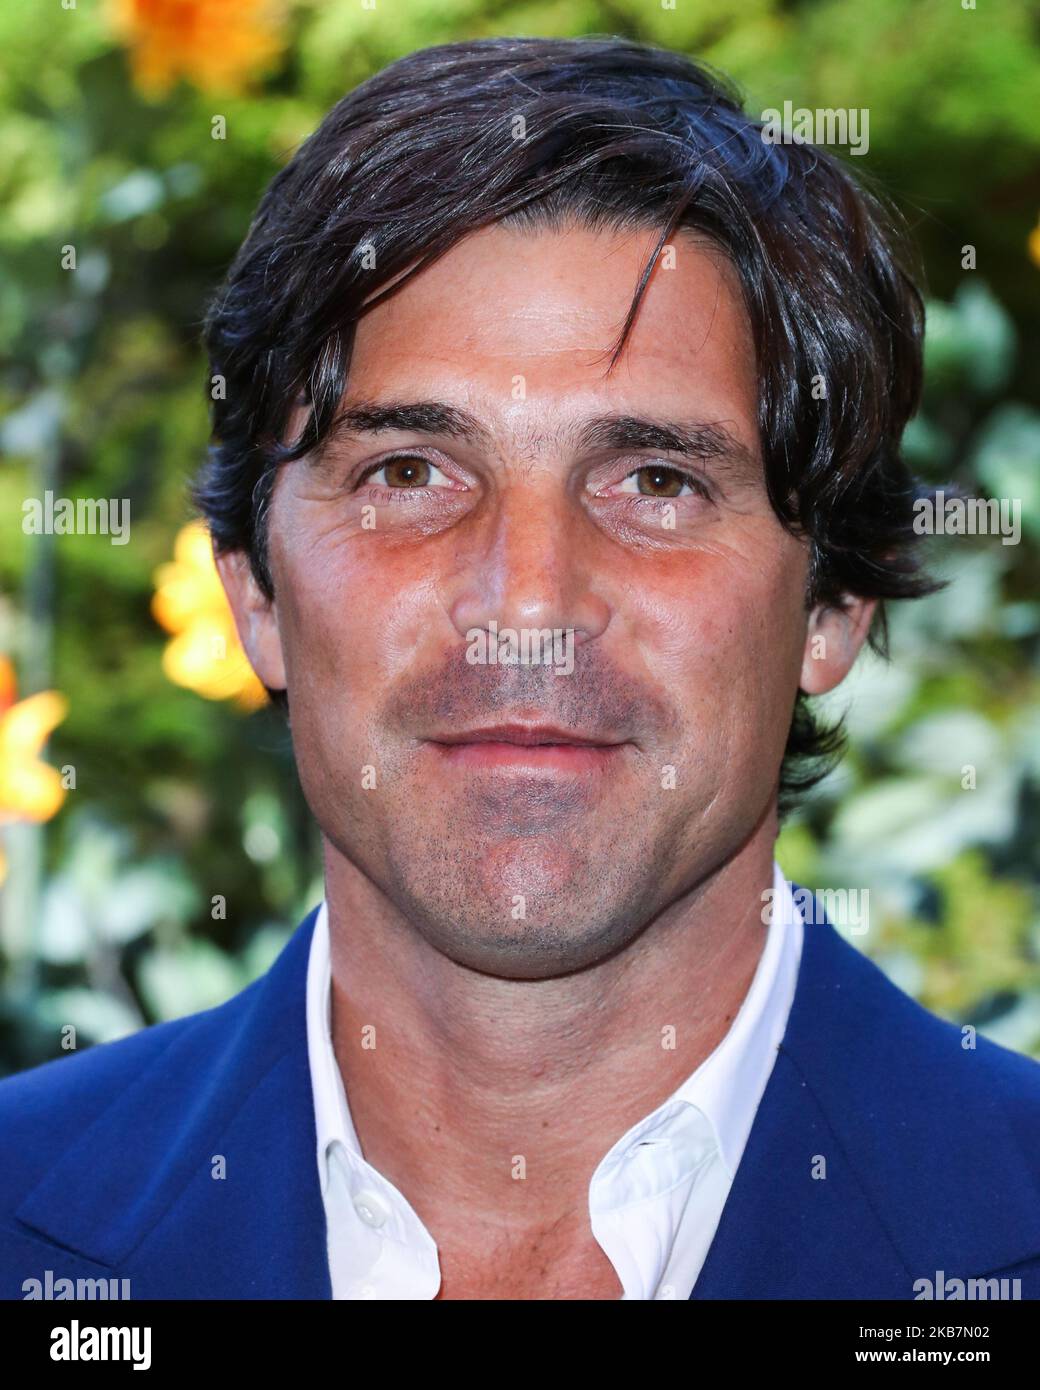 PACIFIC PALISADES, LOS ANGELES, CALIFORNIA, USA - OCTOBER 05: Nacho Figueras arrives at the 10th Annual Veuve Clicquot Polo Classic Los Angeles held at Will Rogers State Historic Park on October 5, 2019 in Pacific Palisades, Los Angeles, California, United States. (Photo by Xavier Collin/Image Press Agency/NurPhoto) Stock Photo